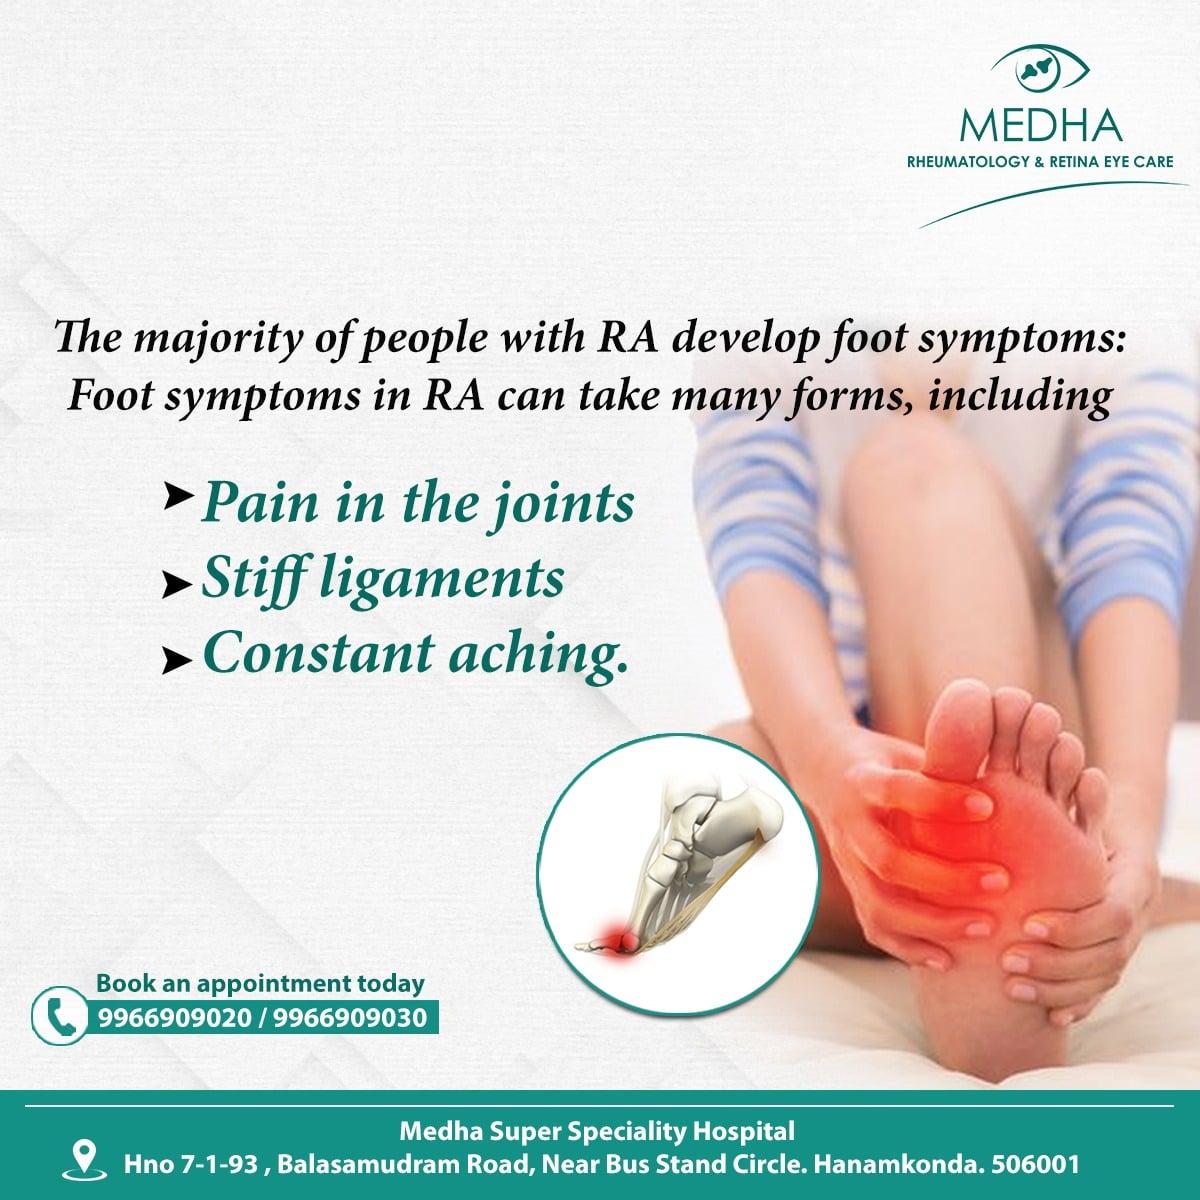 foot inflammation and pain is an early symptom for many people....